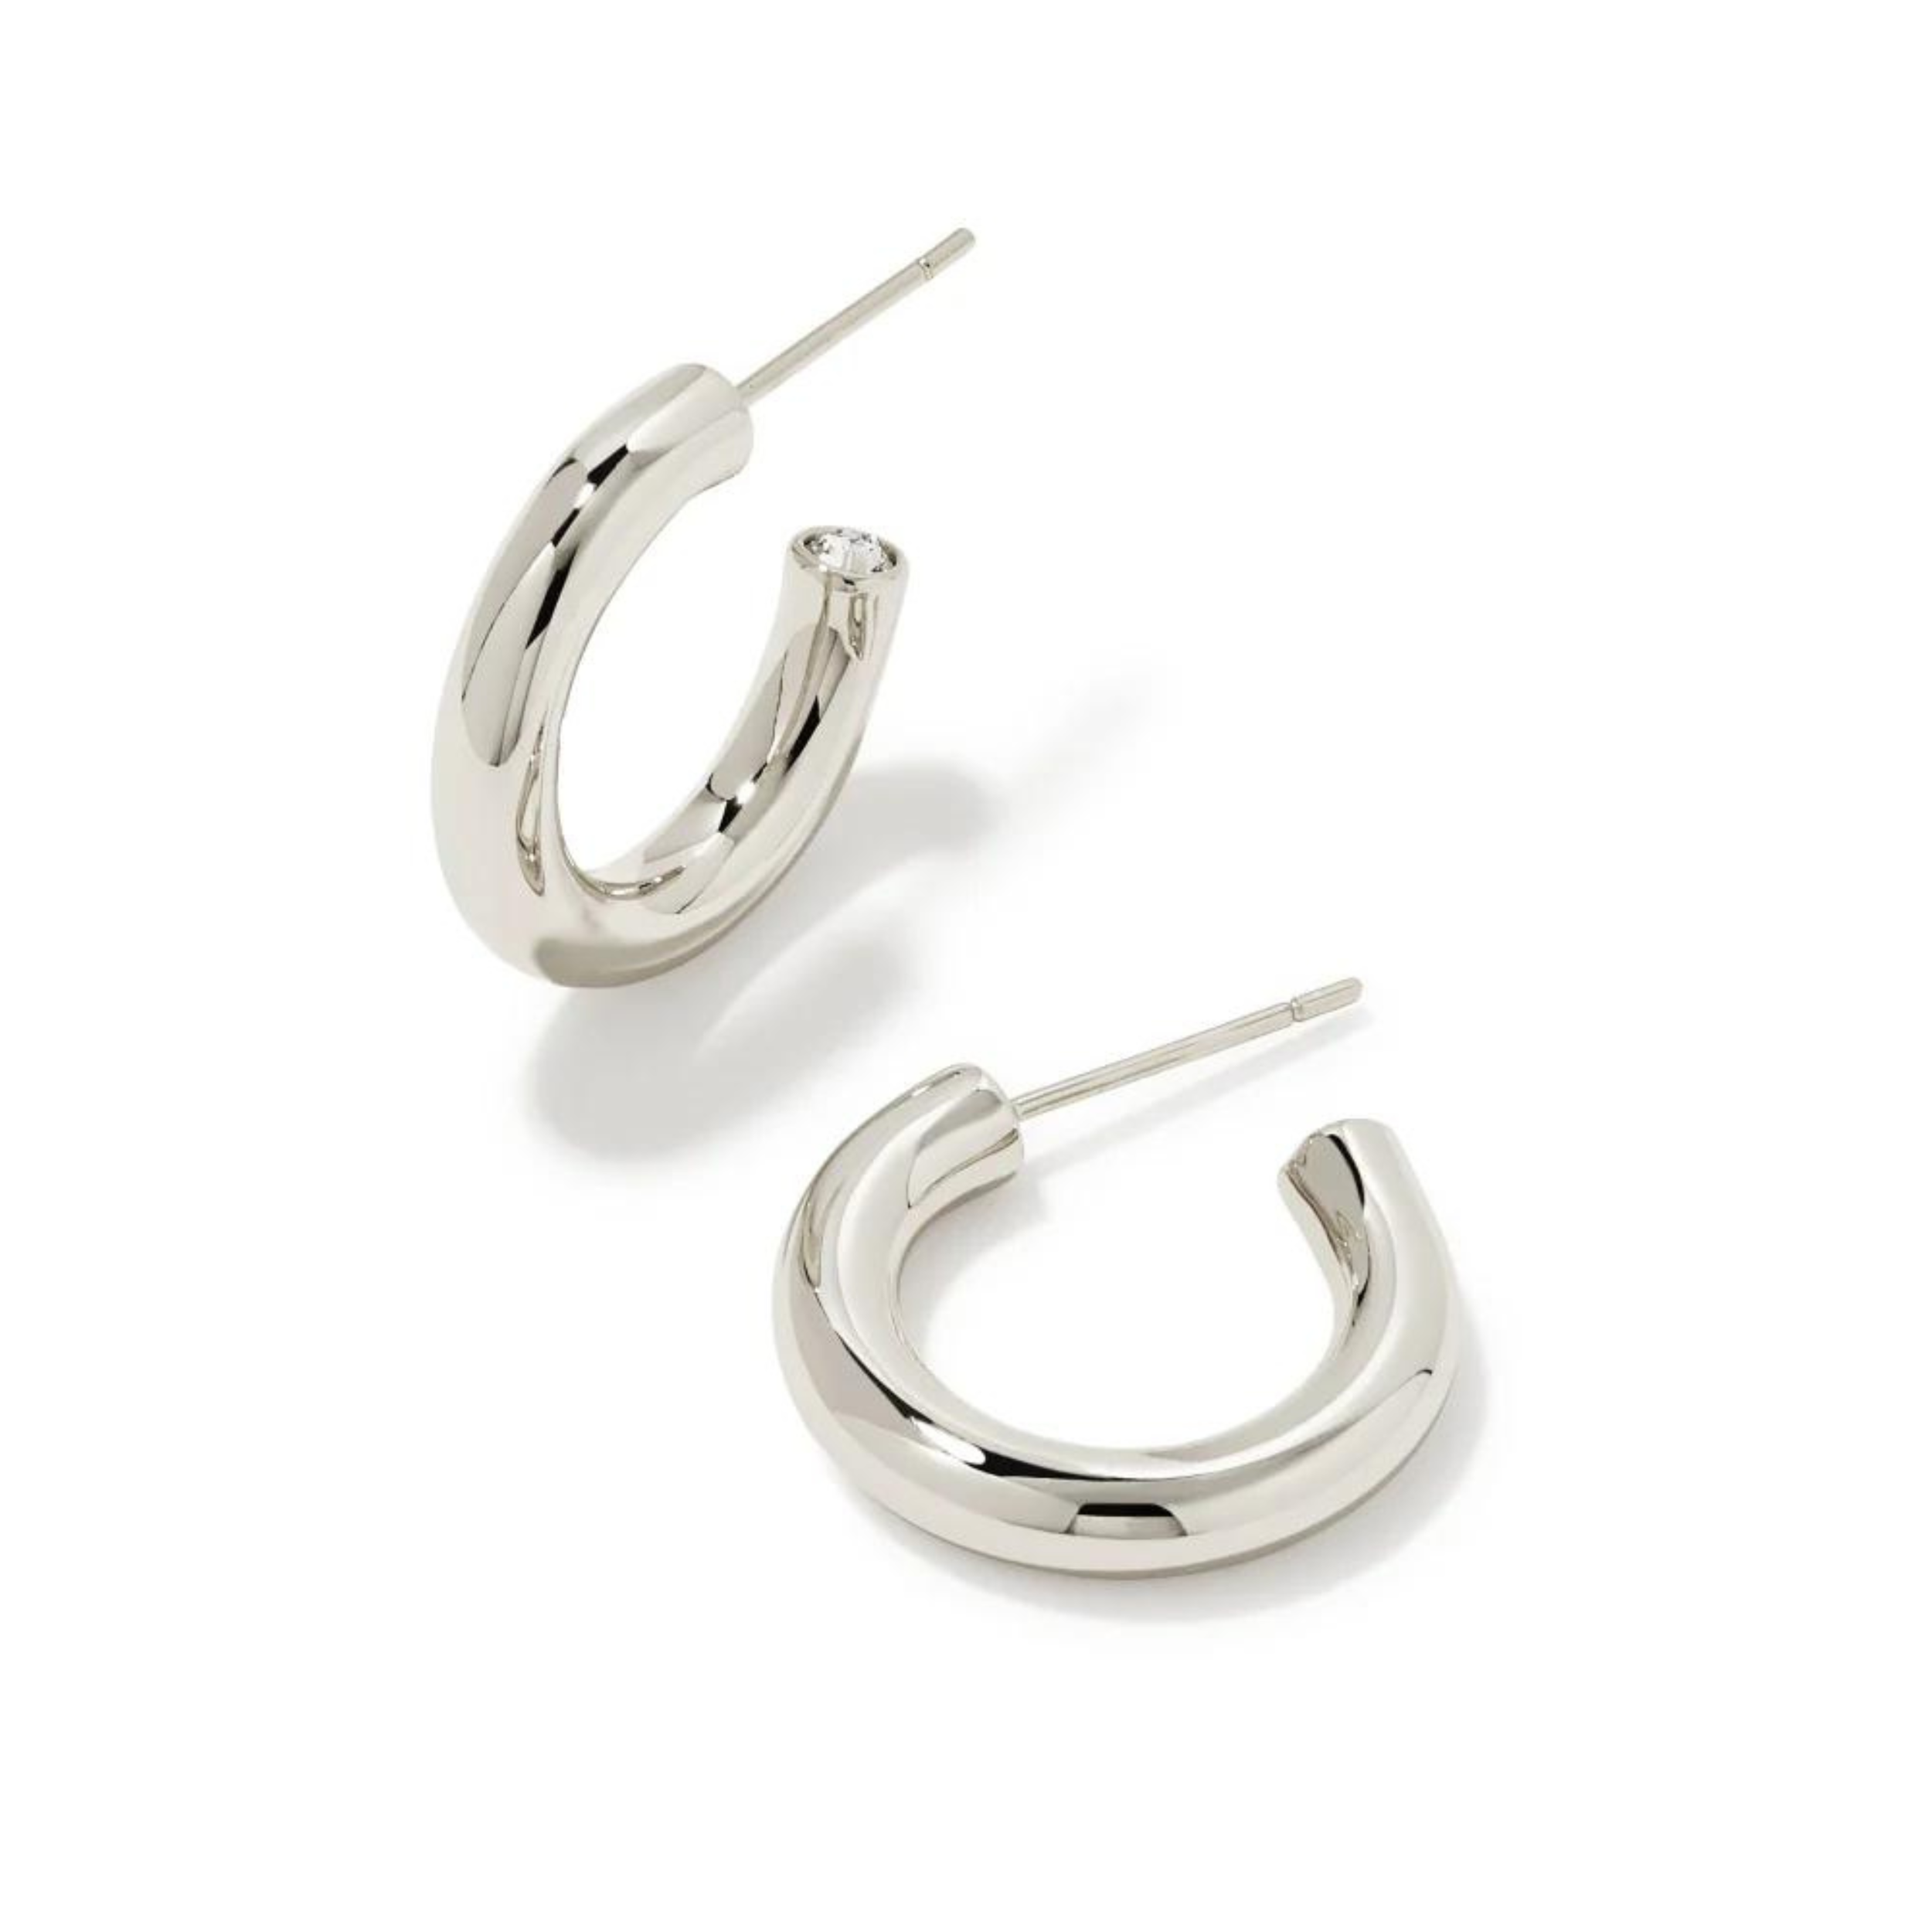 Pictured is a pair of silver hoop earrings on a white background.